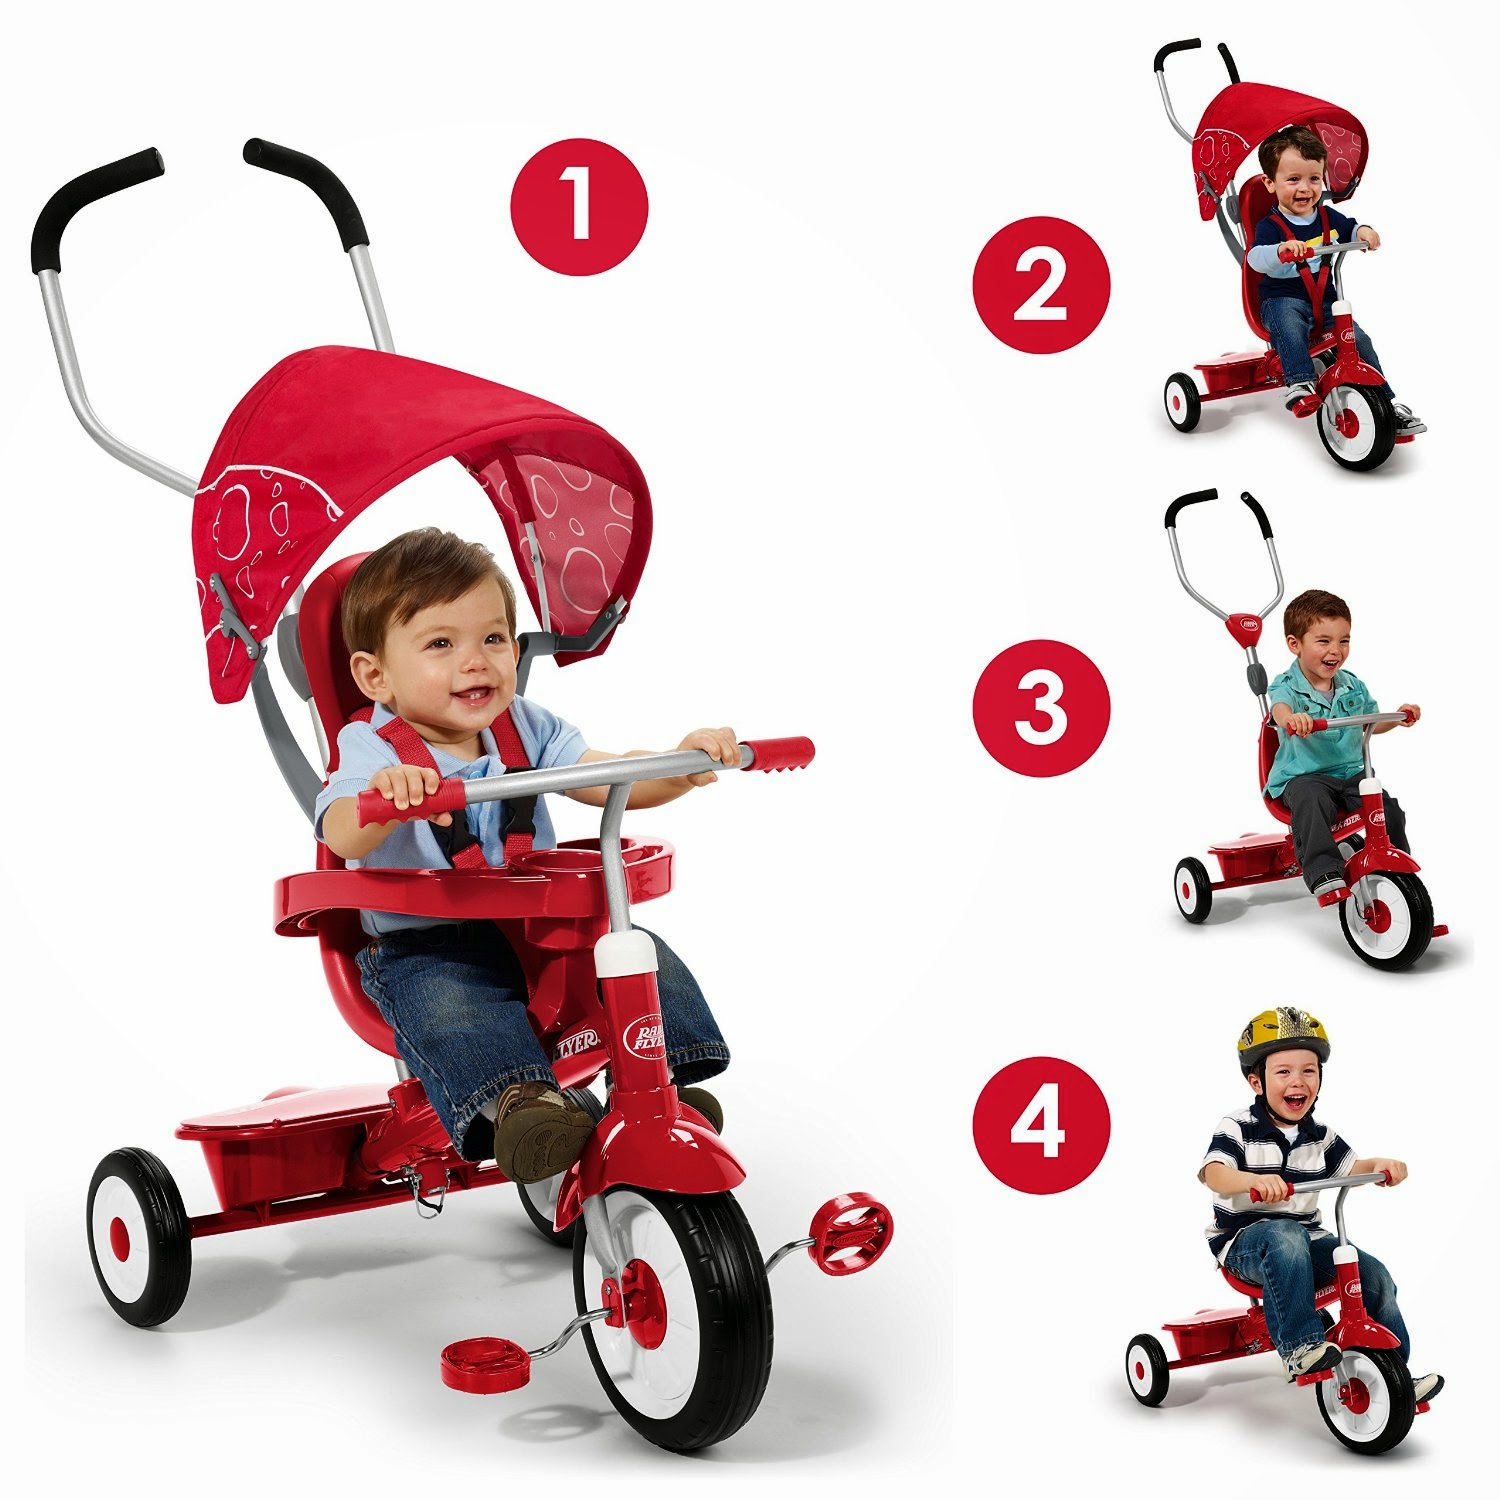 Radio Flyer 4-in-1 Trike, picture, image, review features and specifications